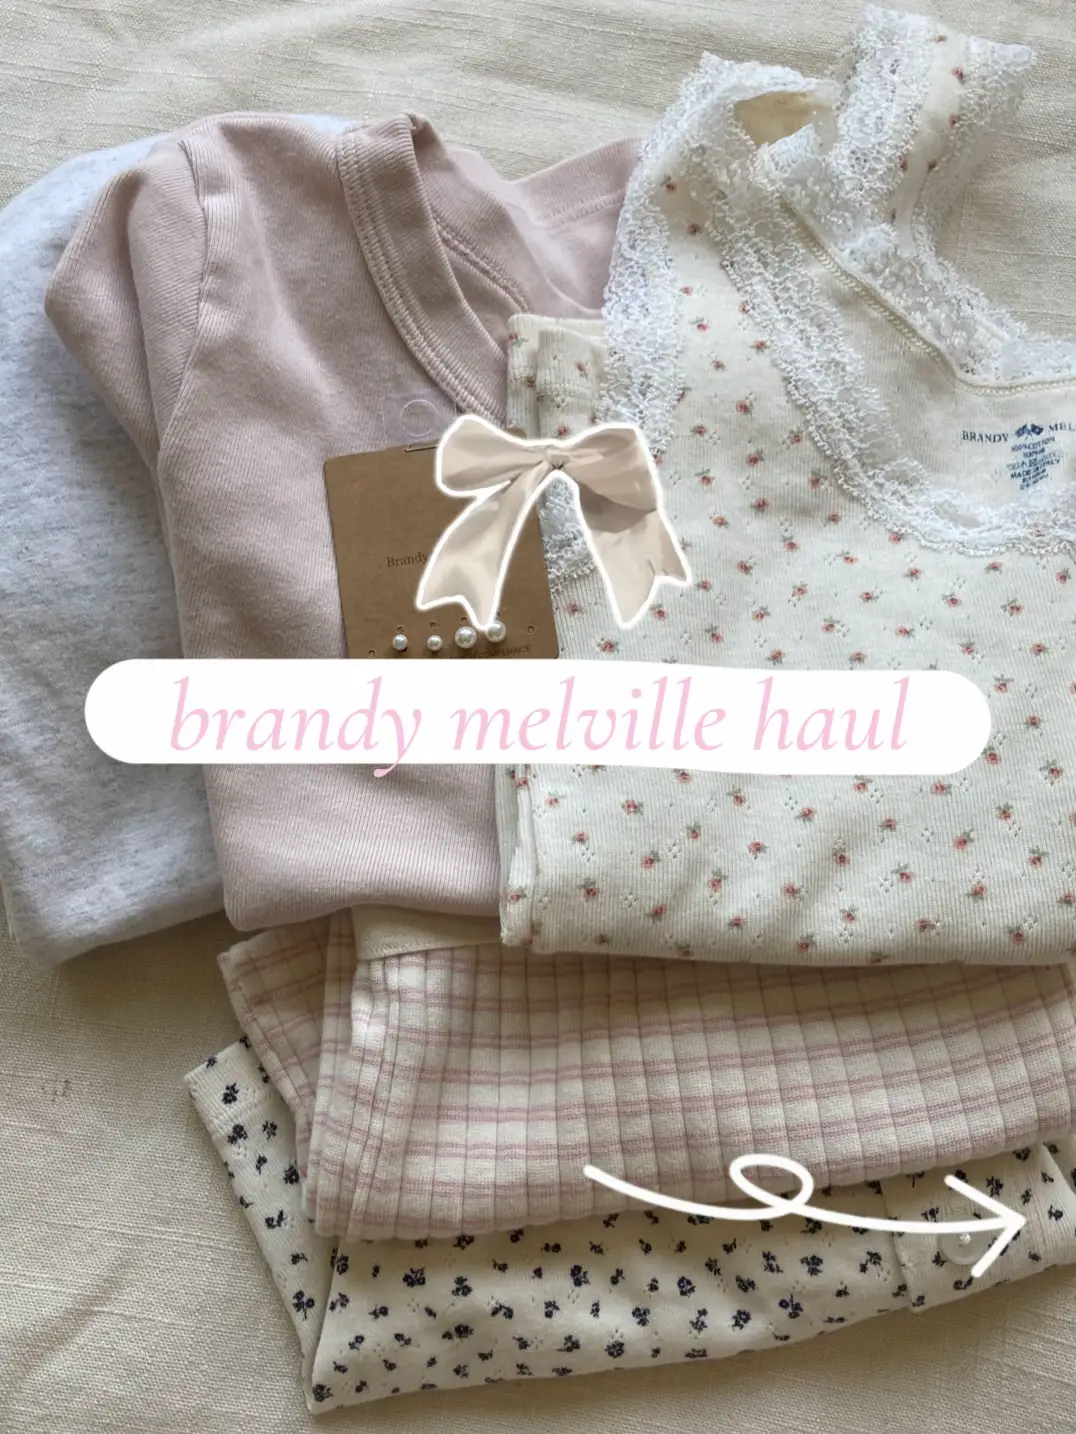 Need Advice: Just received a Brandy Melville Zip Up, from a girl who posted  the jacket as perfect. 😪 Like she didn't rlly own up to it, what do I do? 